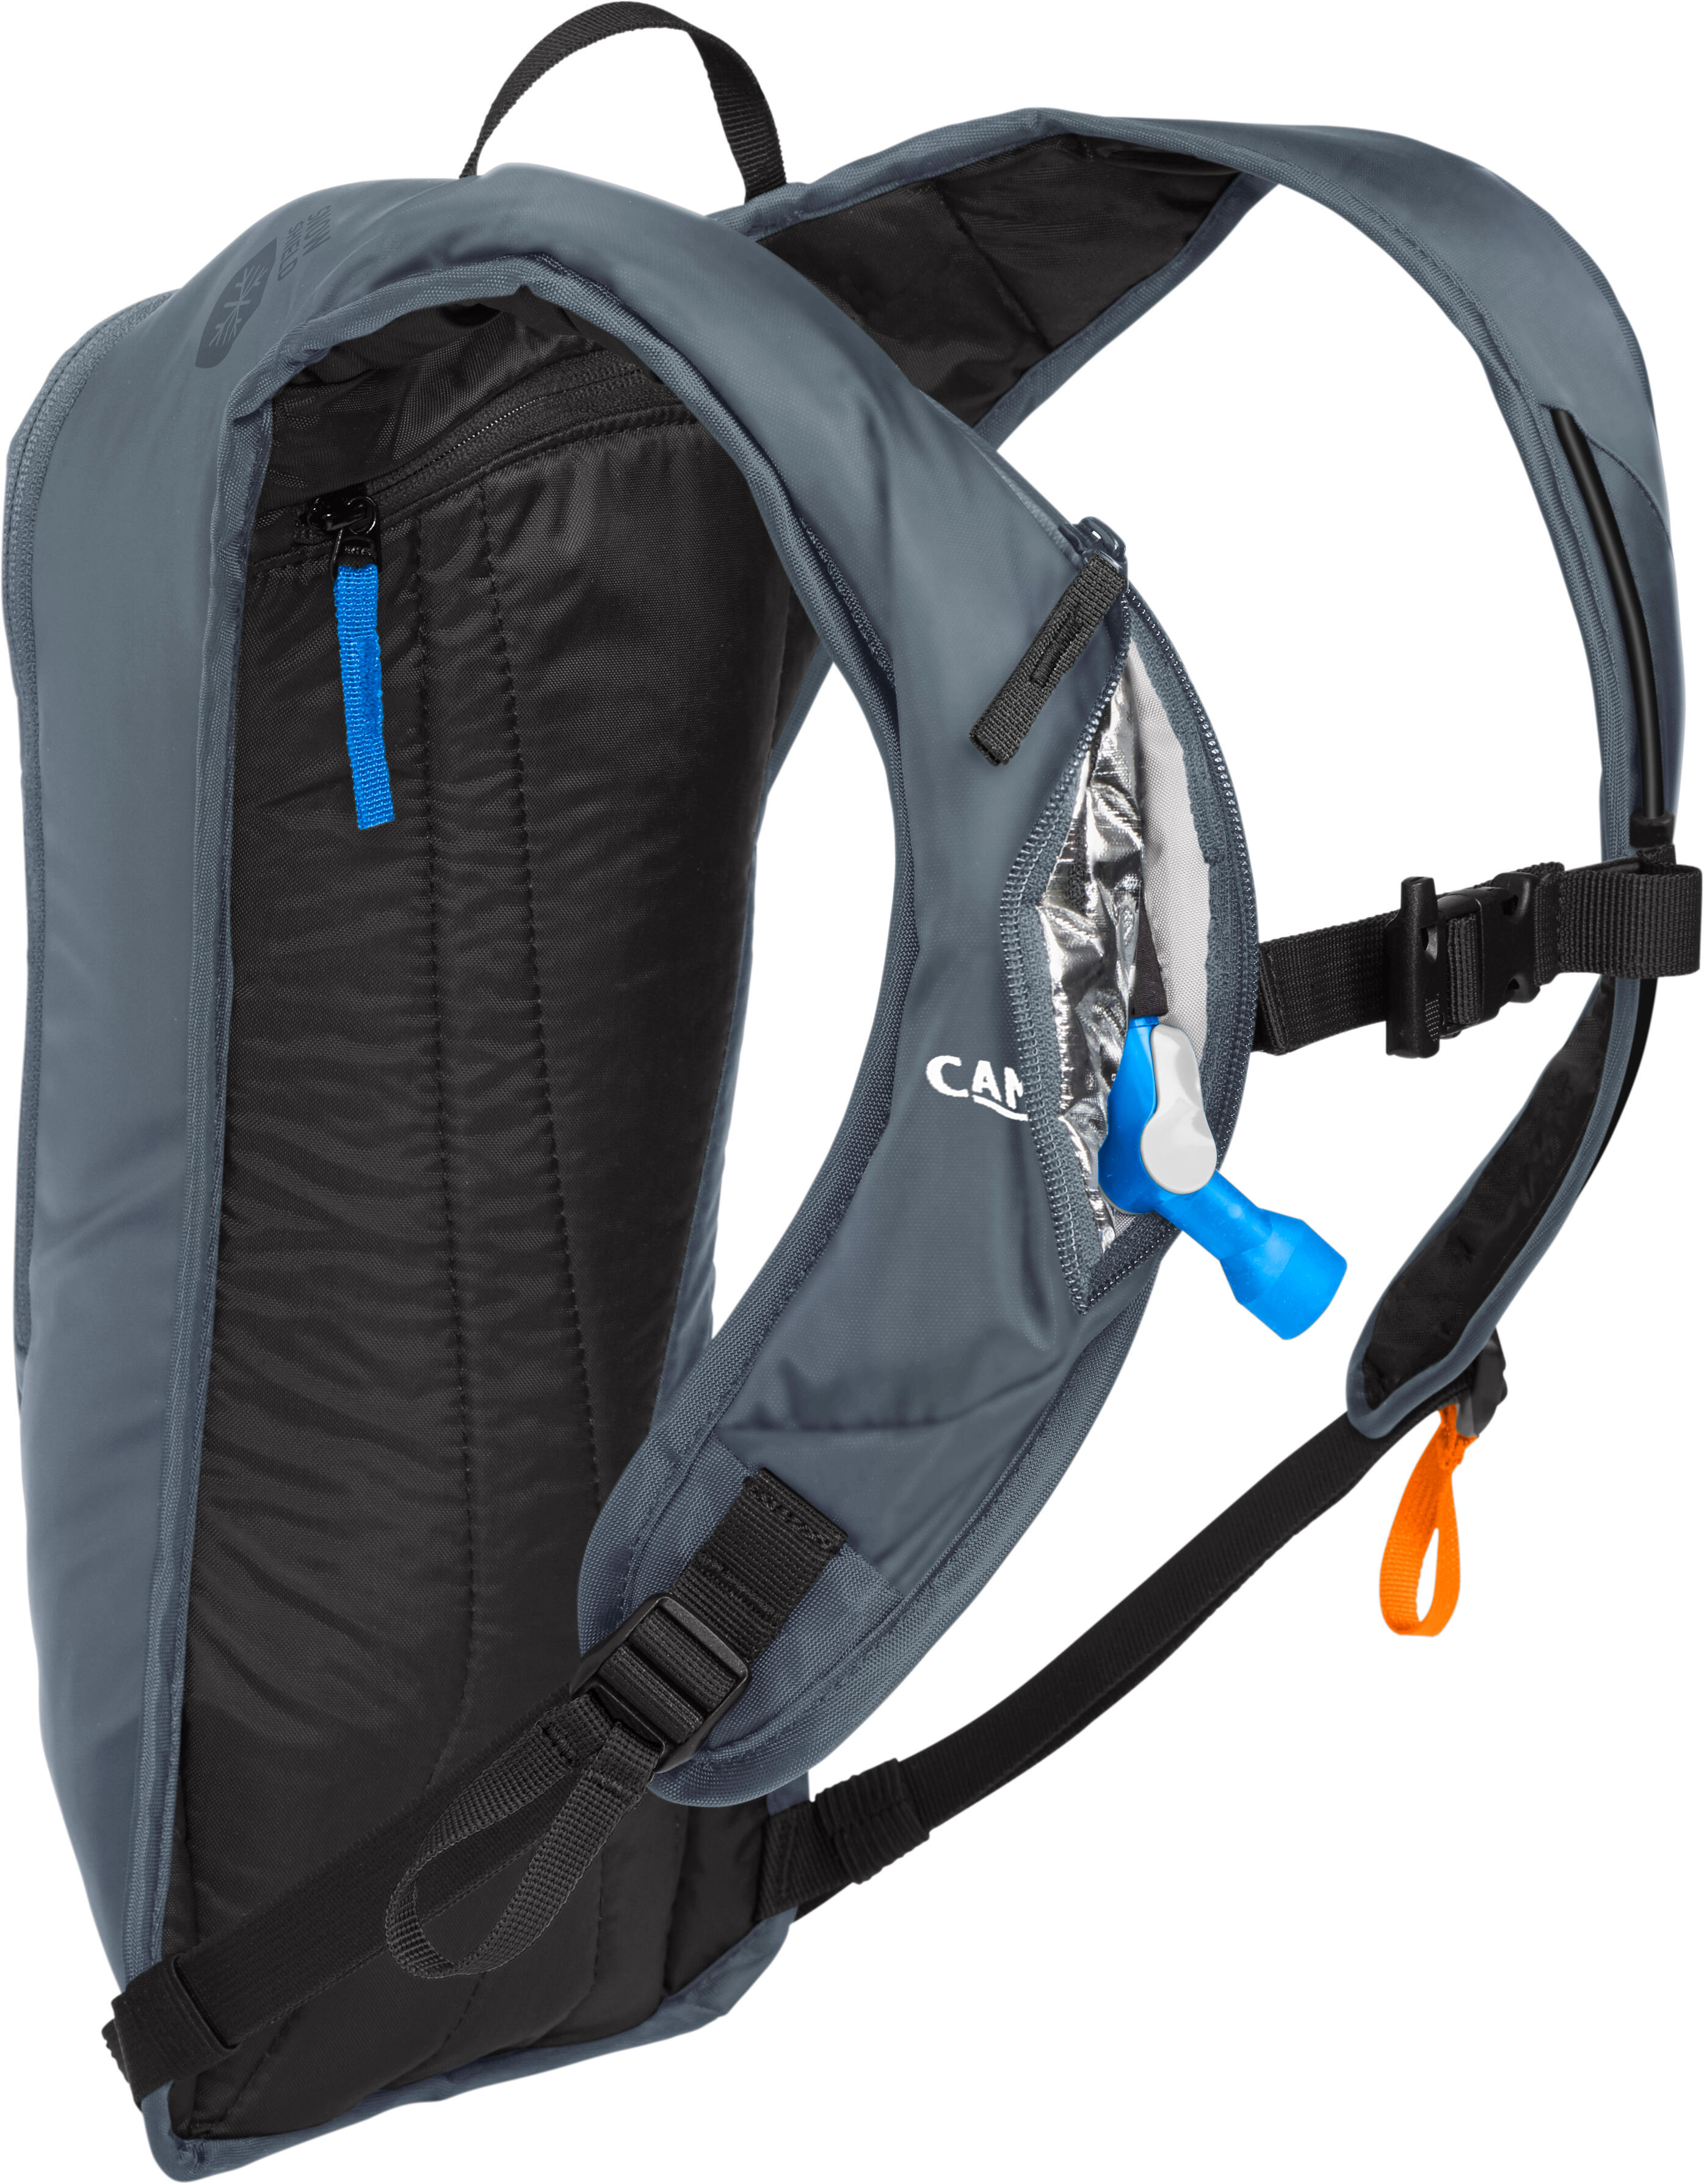 Zoid Winter Hydration Pack 2/7